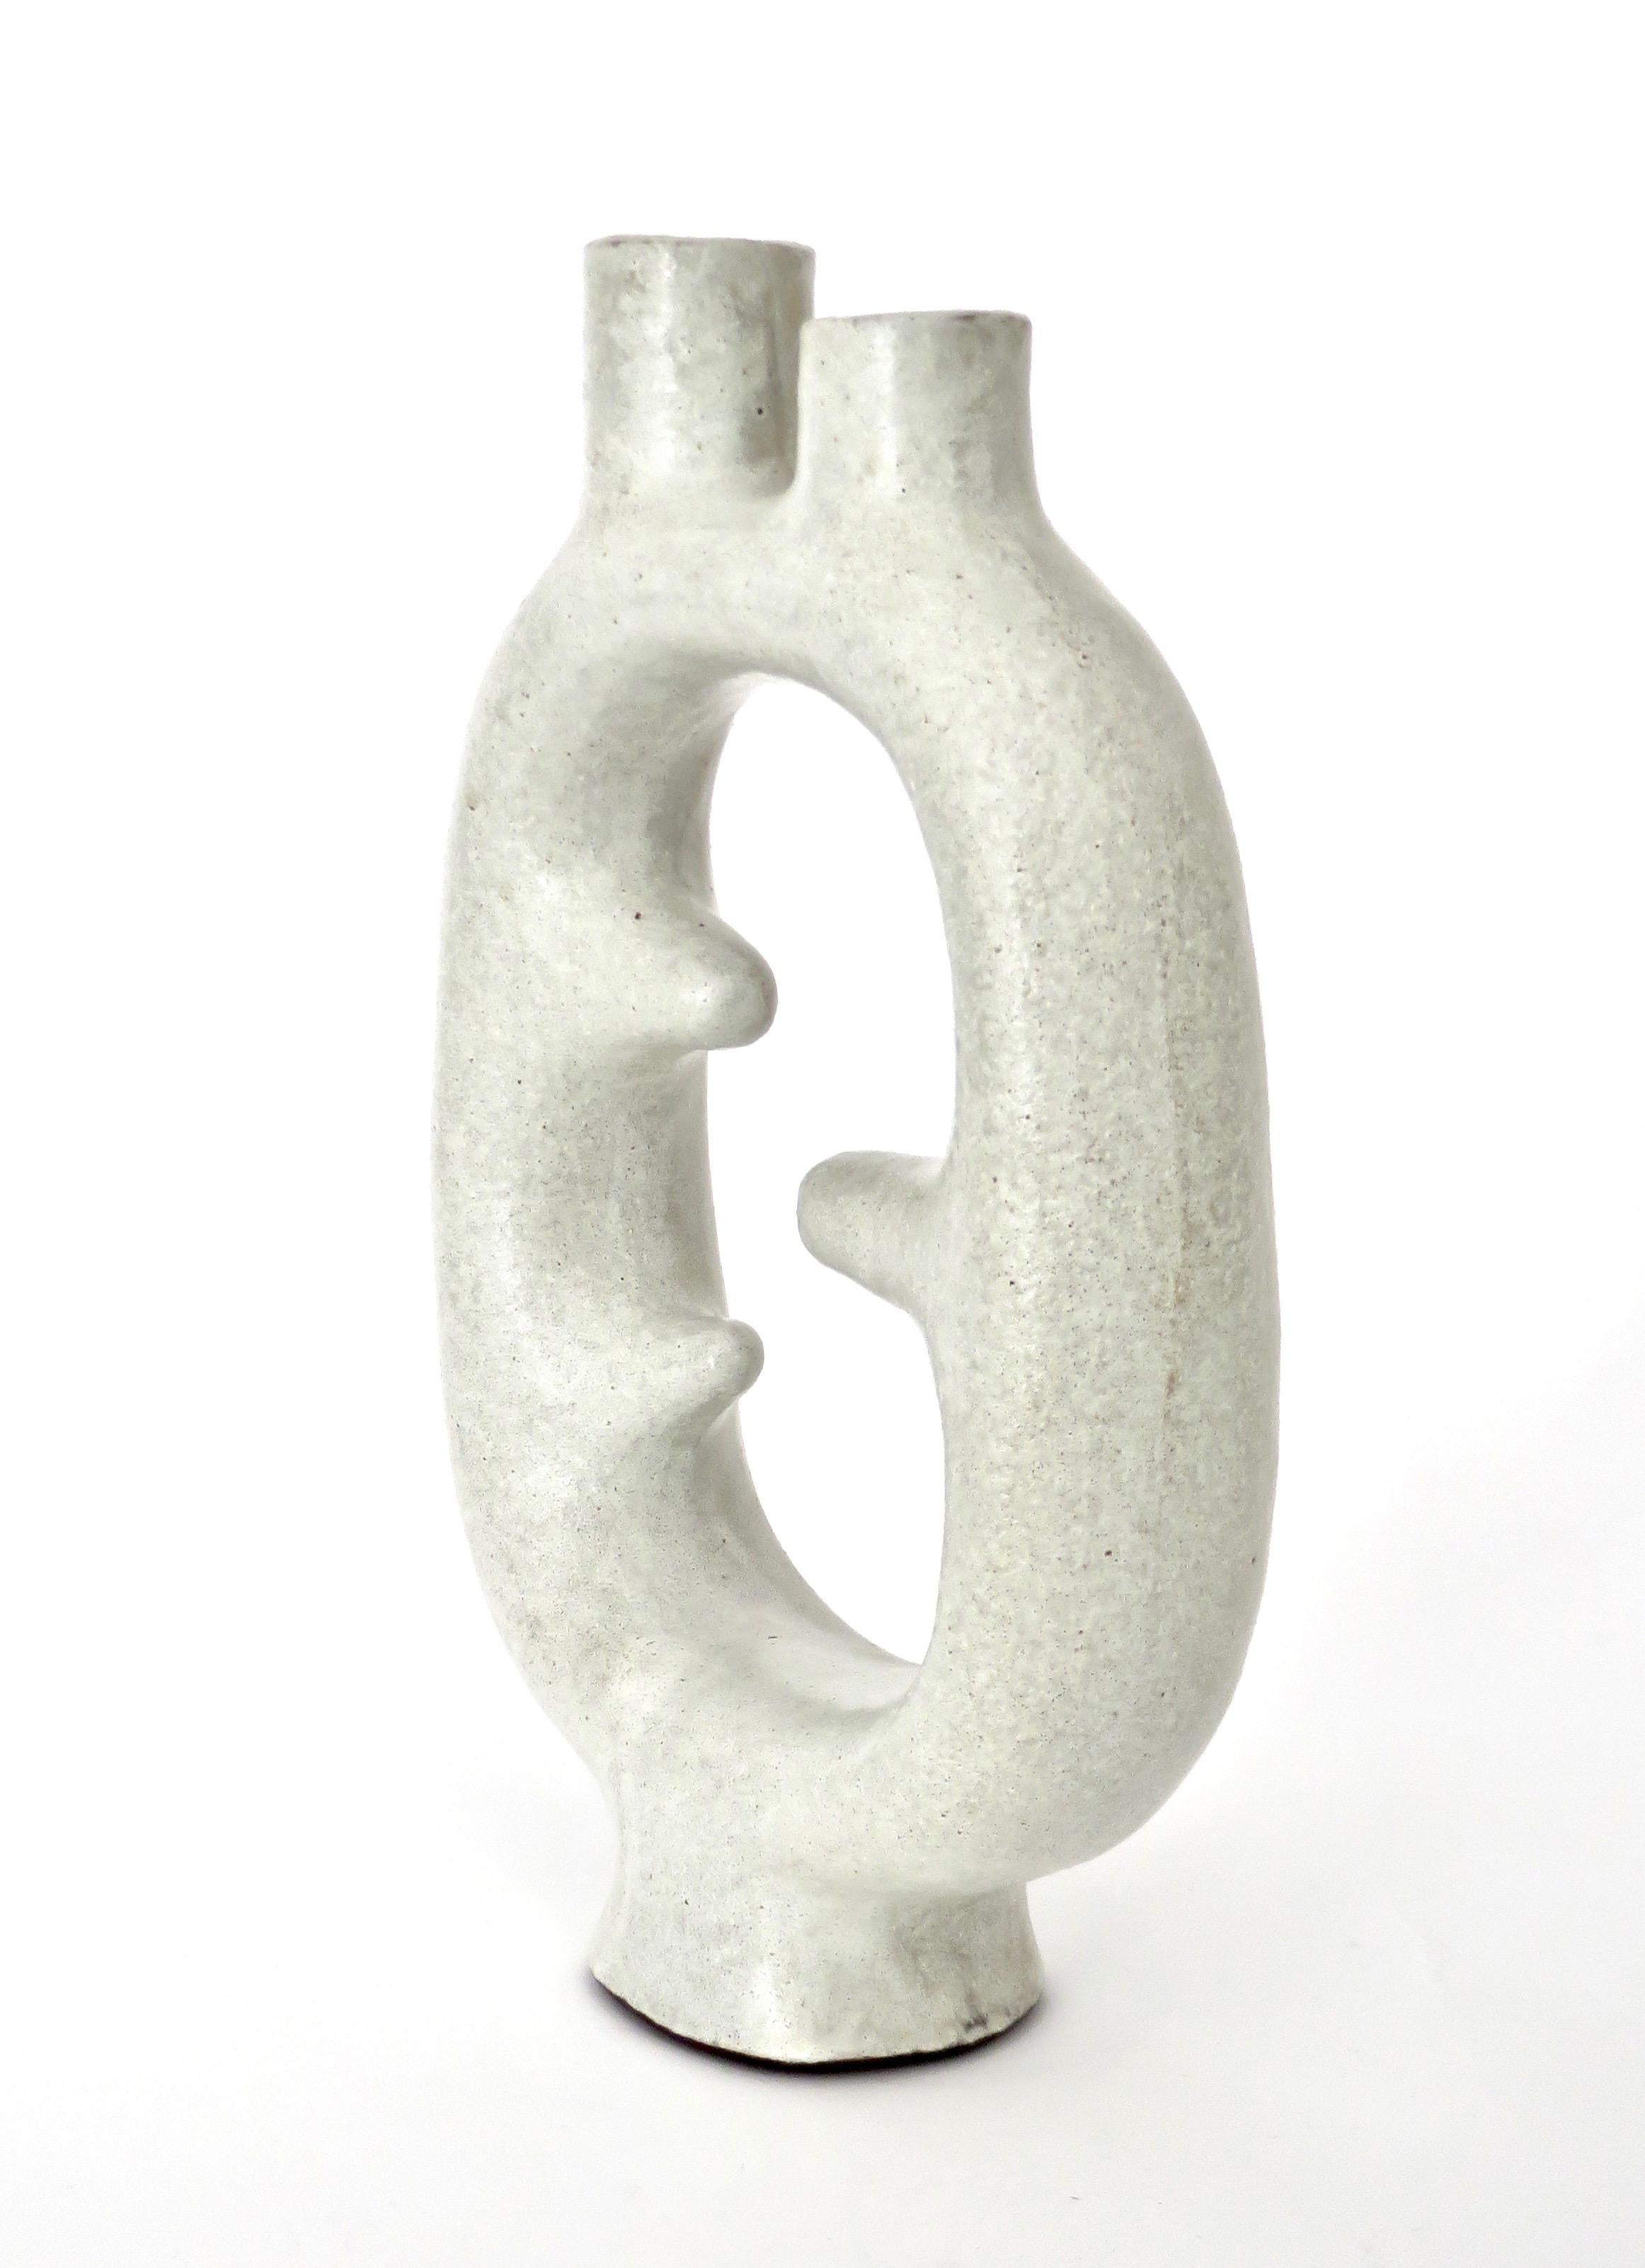 French Sculptural Ceramic Vase with Highly Textured White Glaze 5